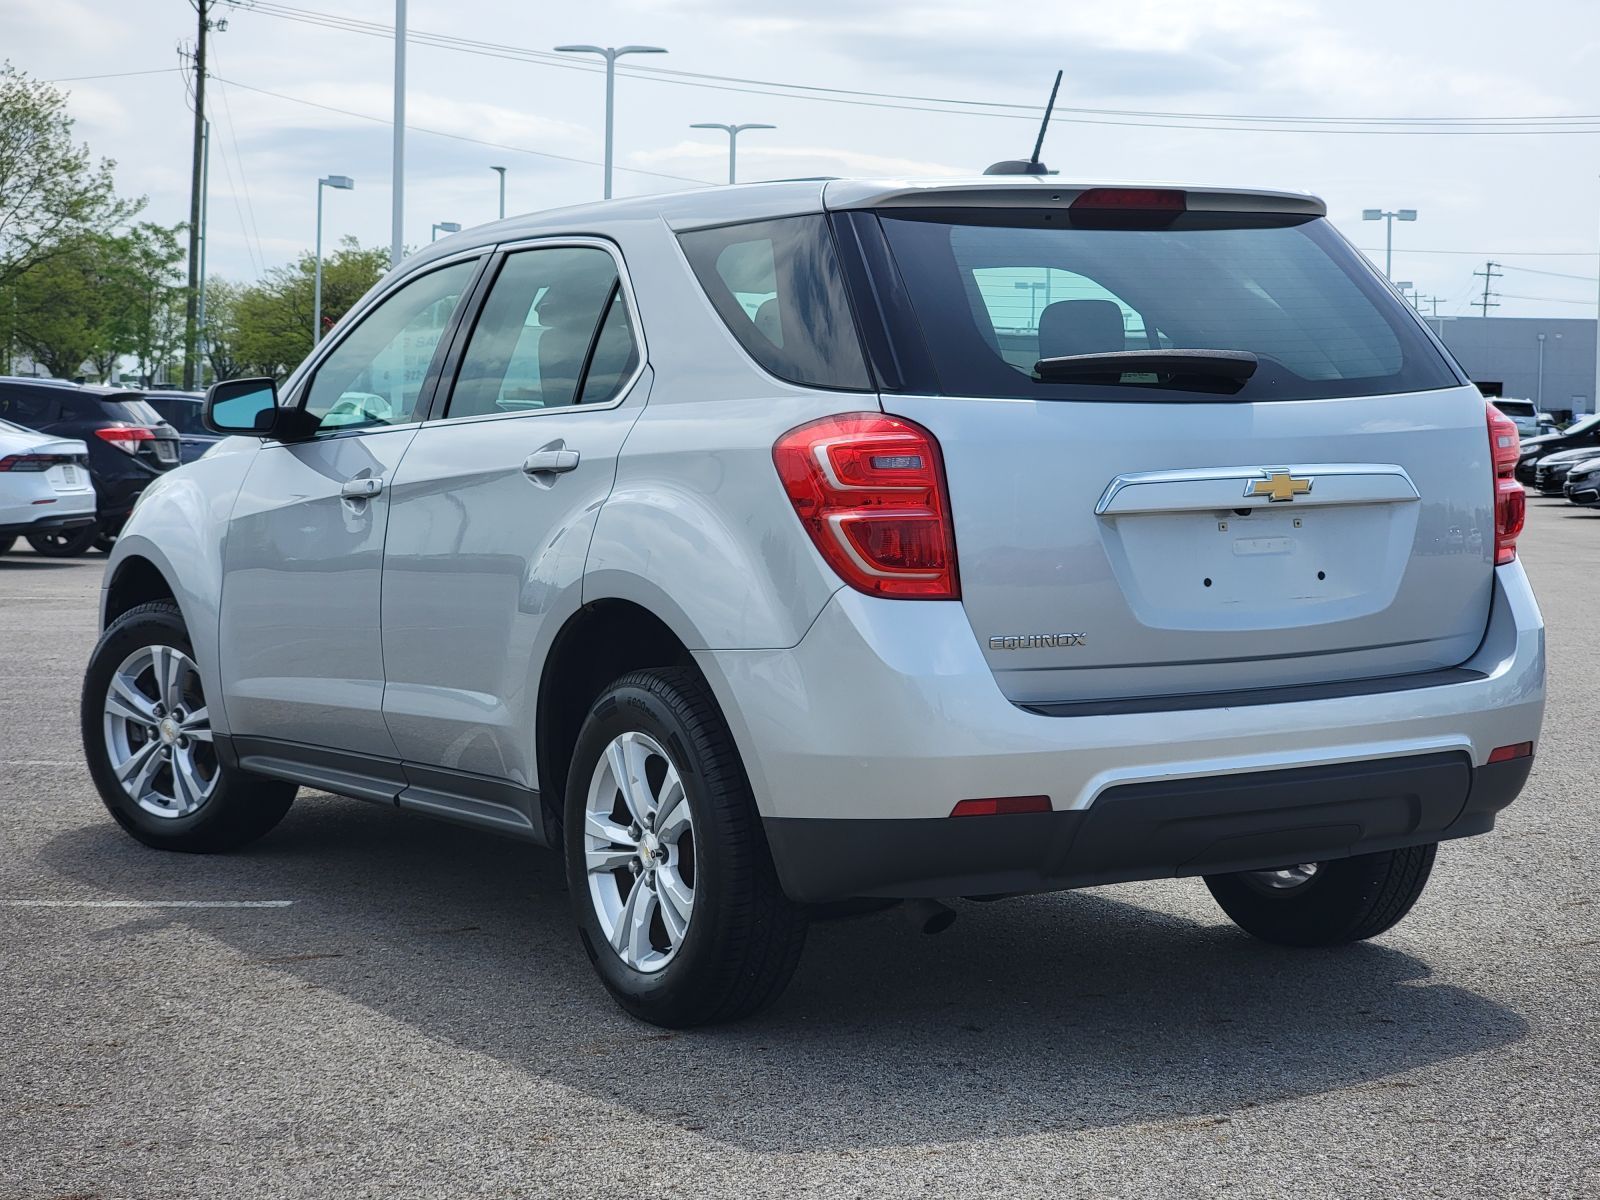 Used, 2017 Chevrolet Equinox FWD 4dr LS, Gray, P0557-10